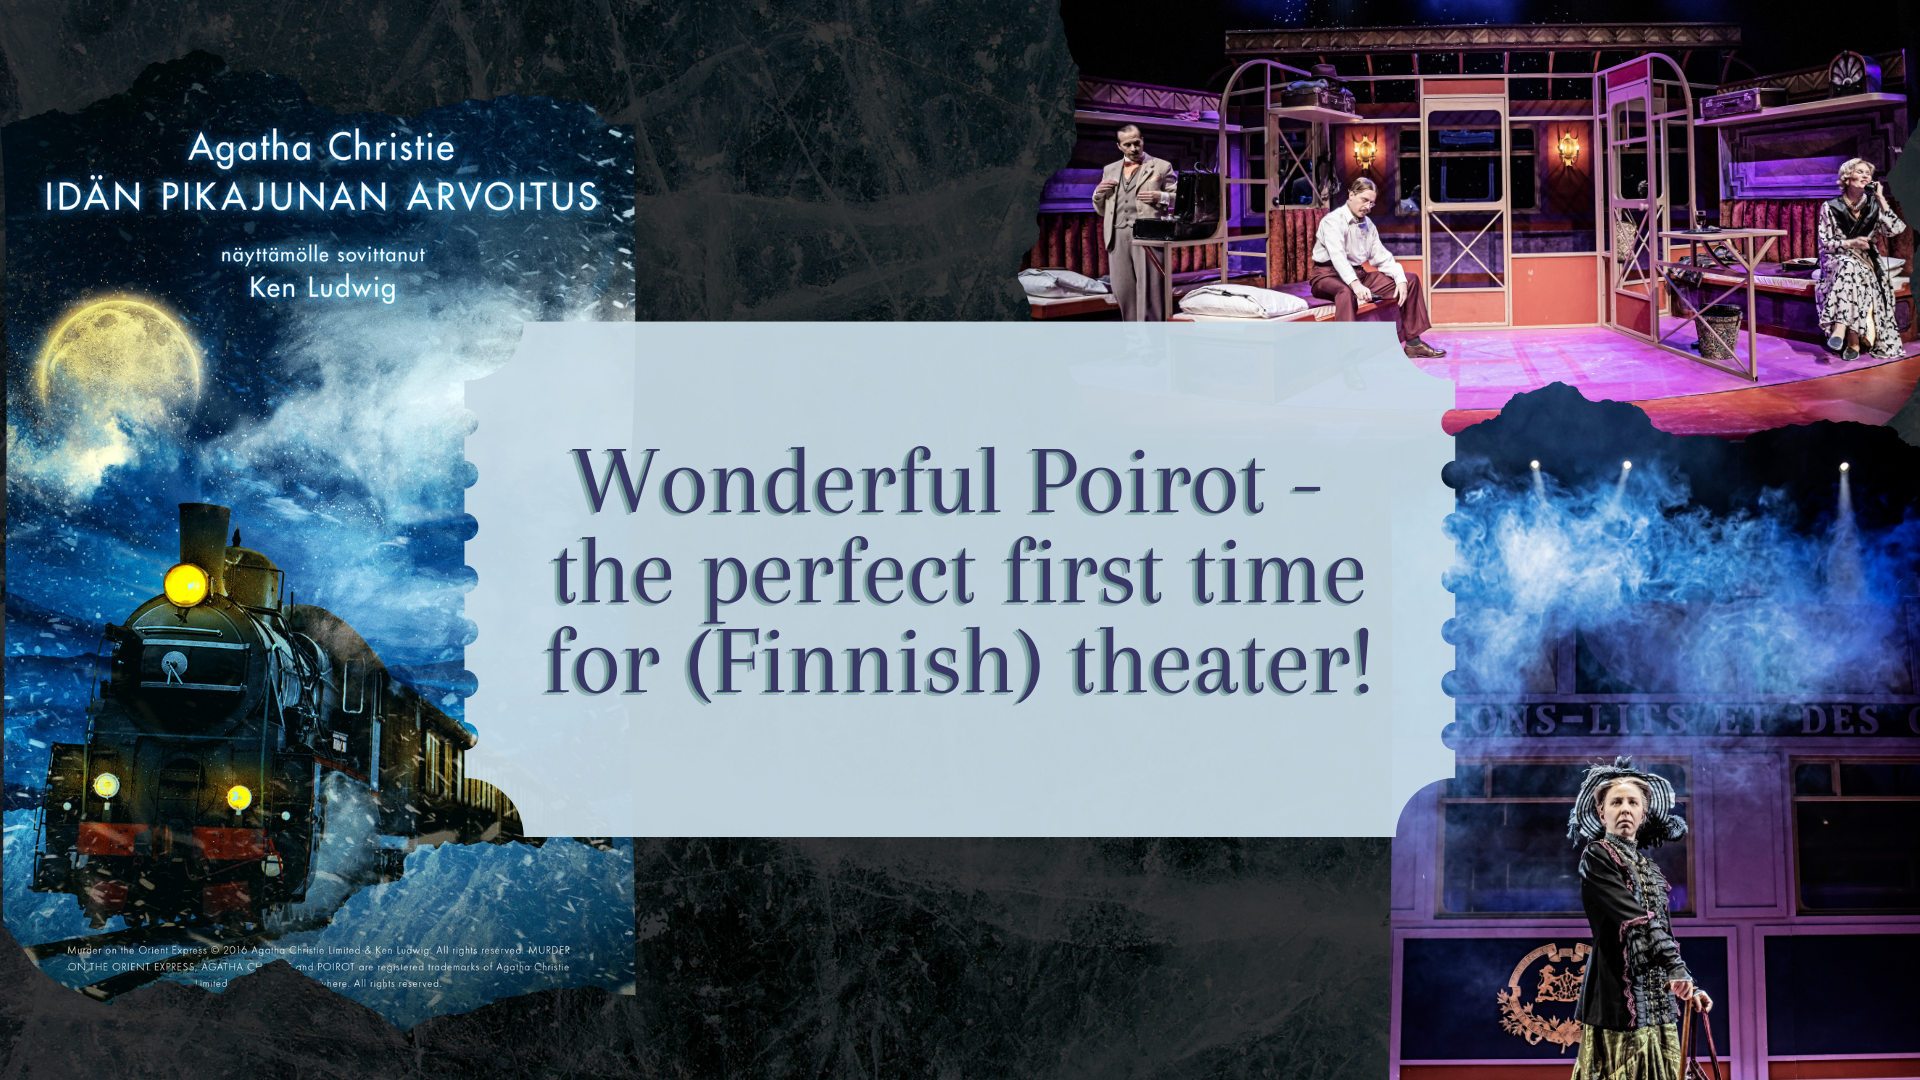 Wonderful Poirot - the perfect first time for (Finnish) theater!